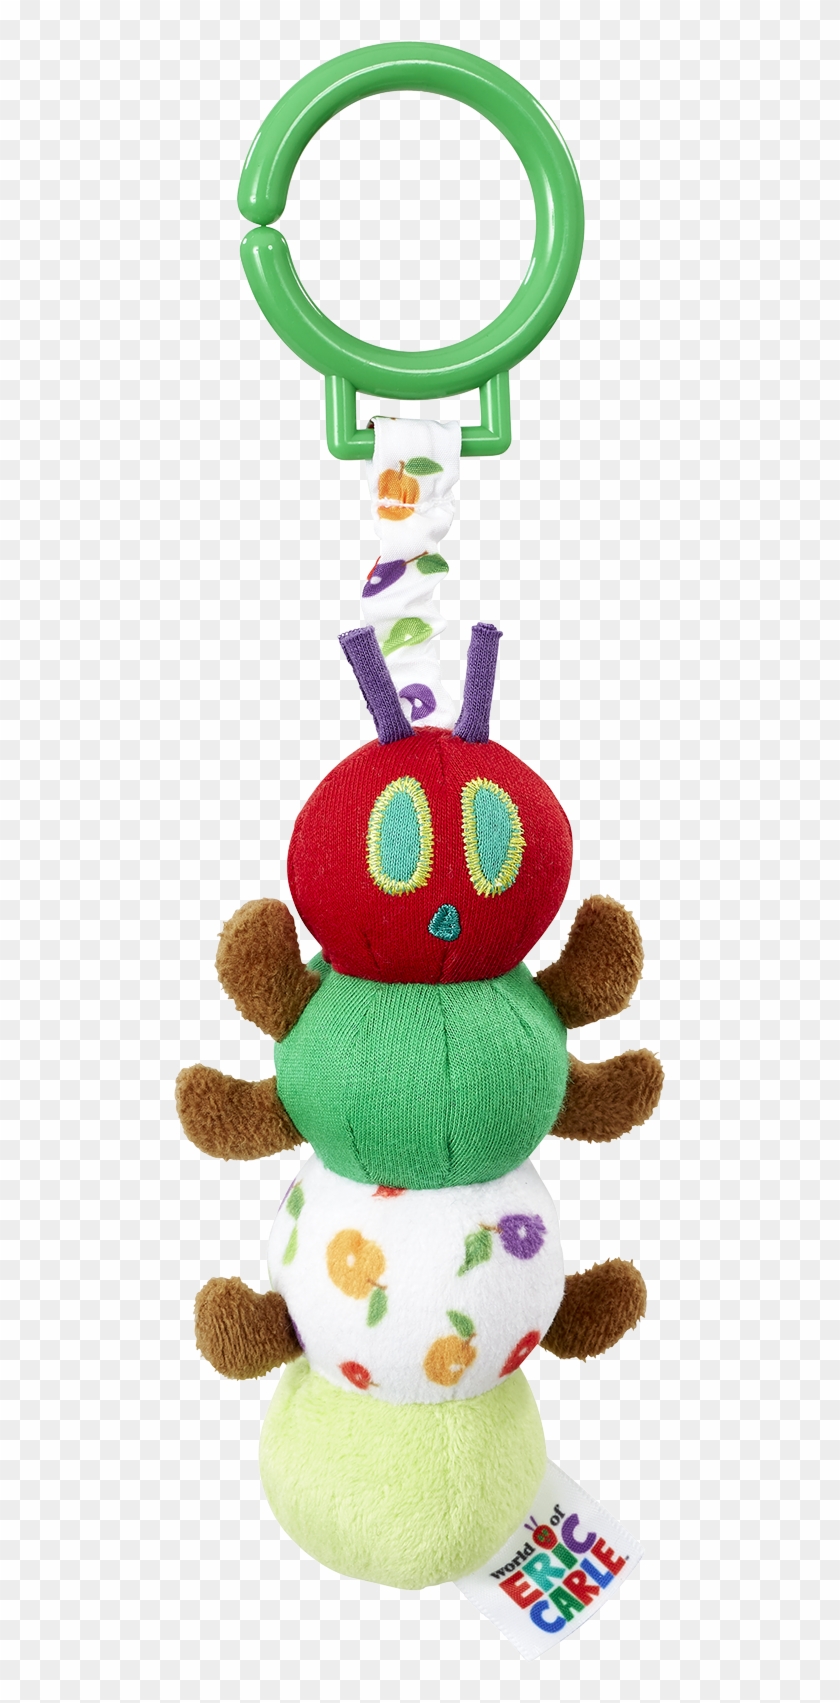 Pin By Rainbow Designs On The Very Hungry Caterpillar - Stuffed Toy Clipart #5115118